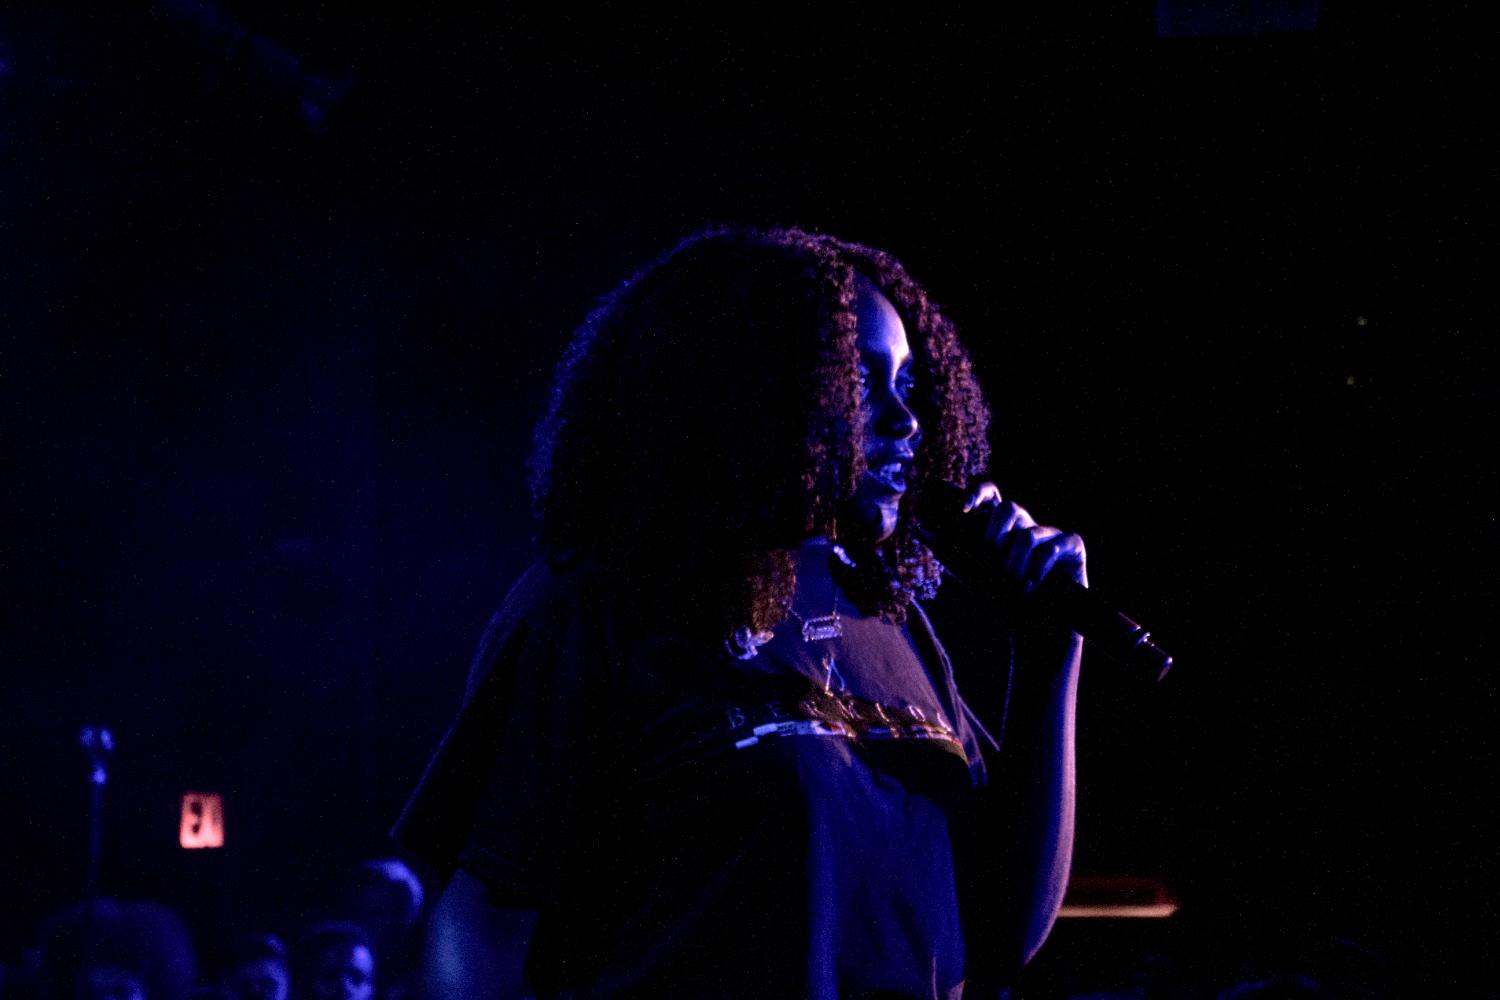 Noname+was+one+of+the+many+performers+for+the+Mystery+Concert.